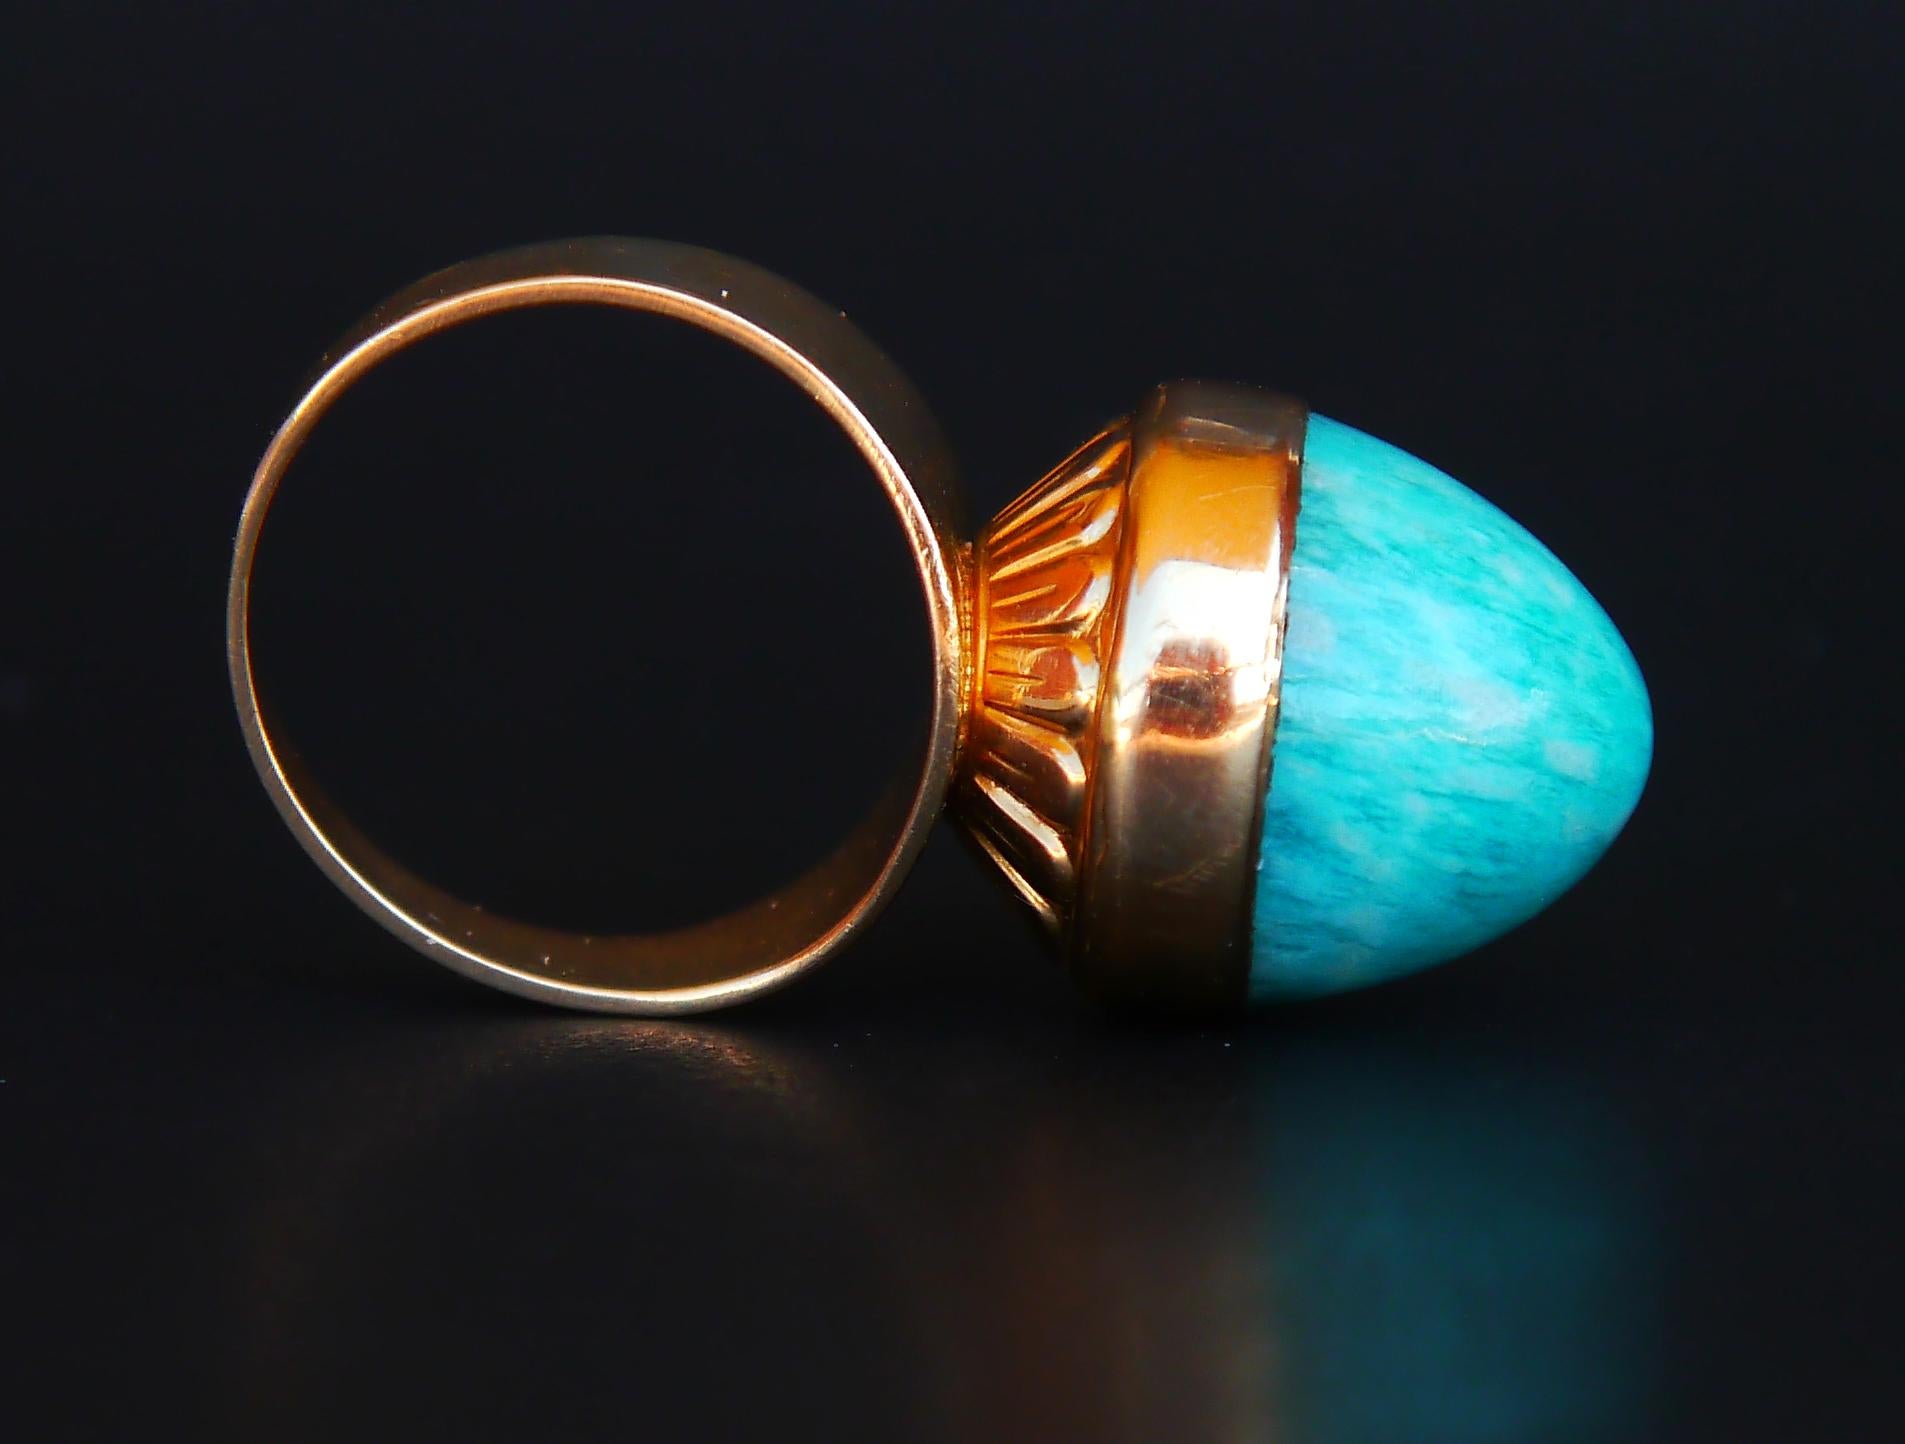 Unusual modernist ring in solid 18K Yellow Gold with fine setting of some variety of Amazonit stone cut cabochon measuring Ø 12 mm x 11 mm long x 8 mm widest / ca. 8 ct. Beautifully shaped and polished stone of vibrant Blue and Whiter colors. Crown